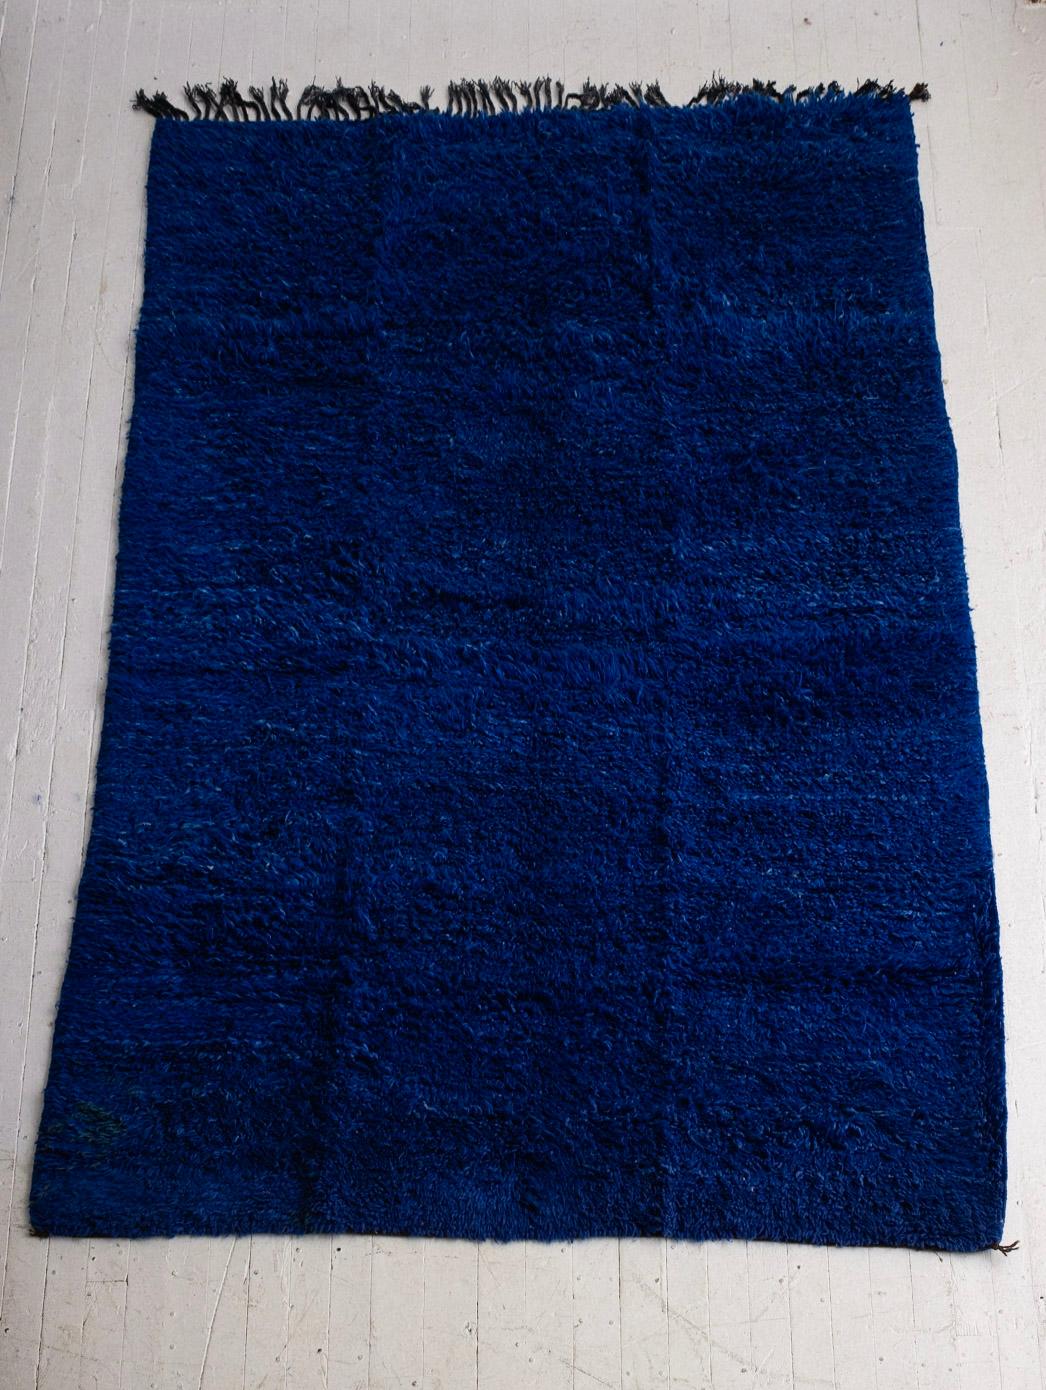 Large hand knotted Moroccan wool rug in cobalt blue. High pile shag. Color variations give dimension to the vivid shade of blue.